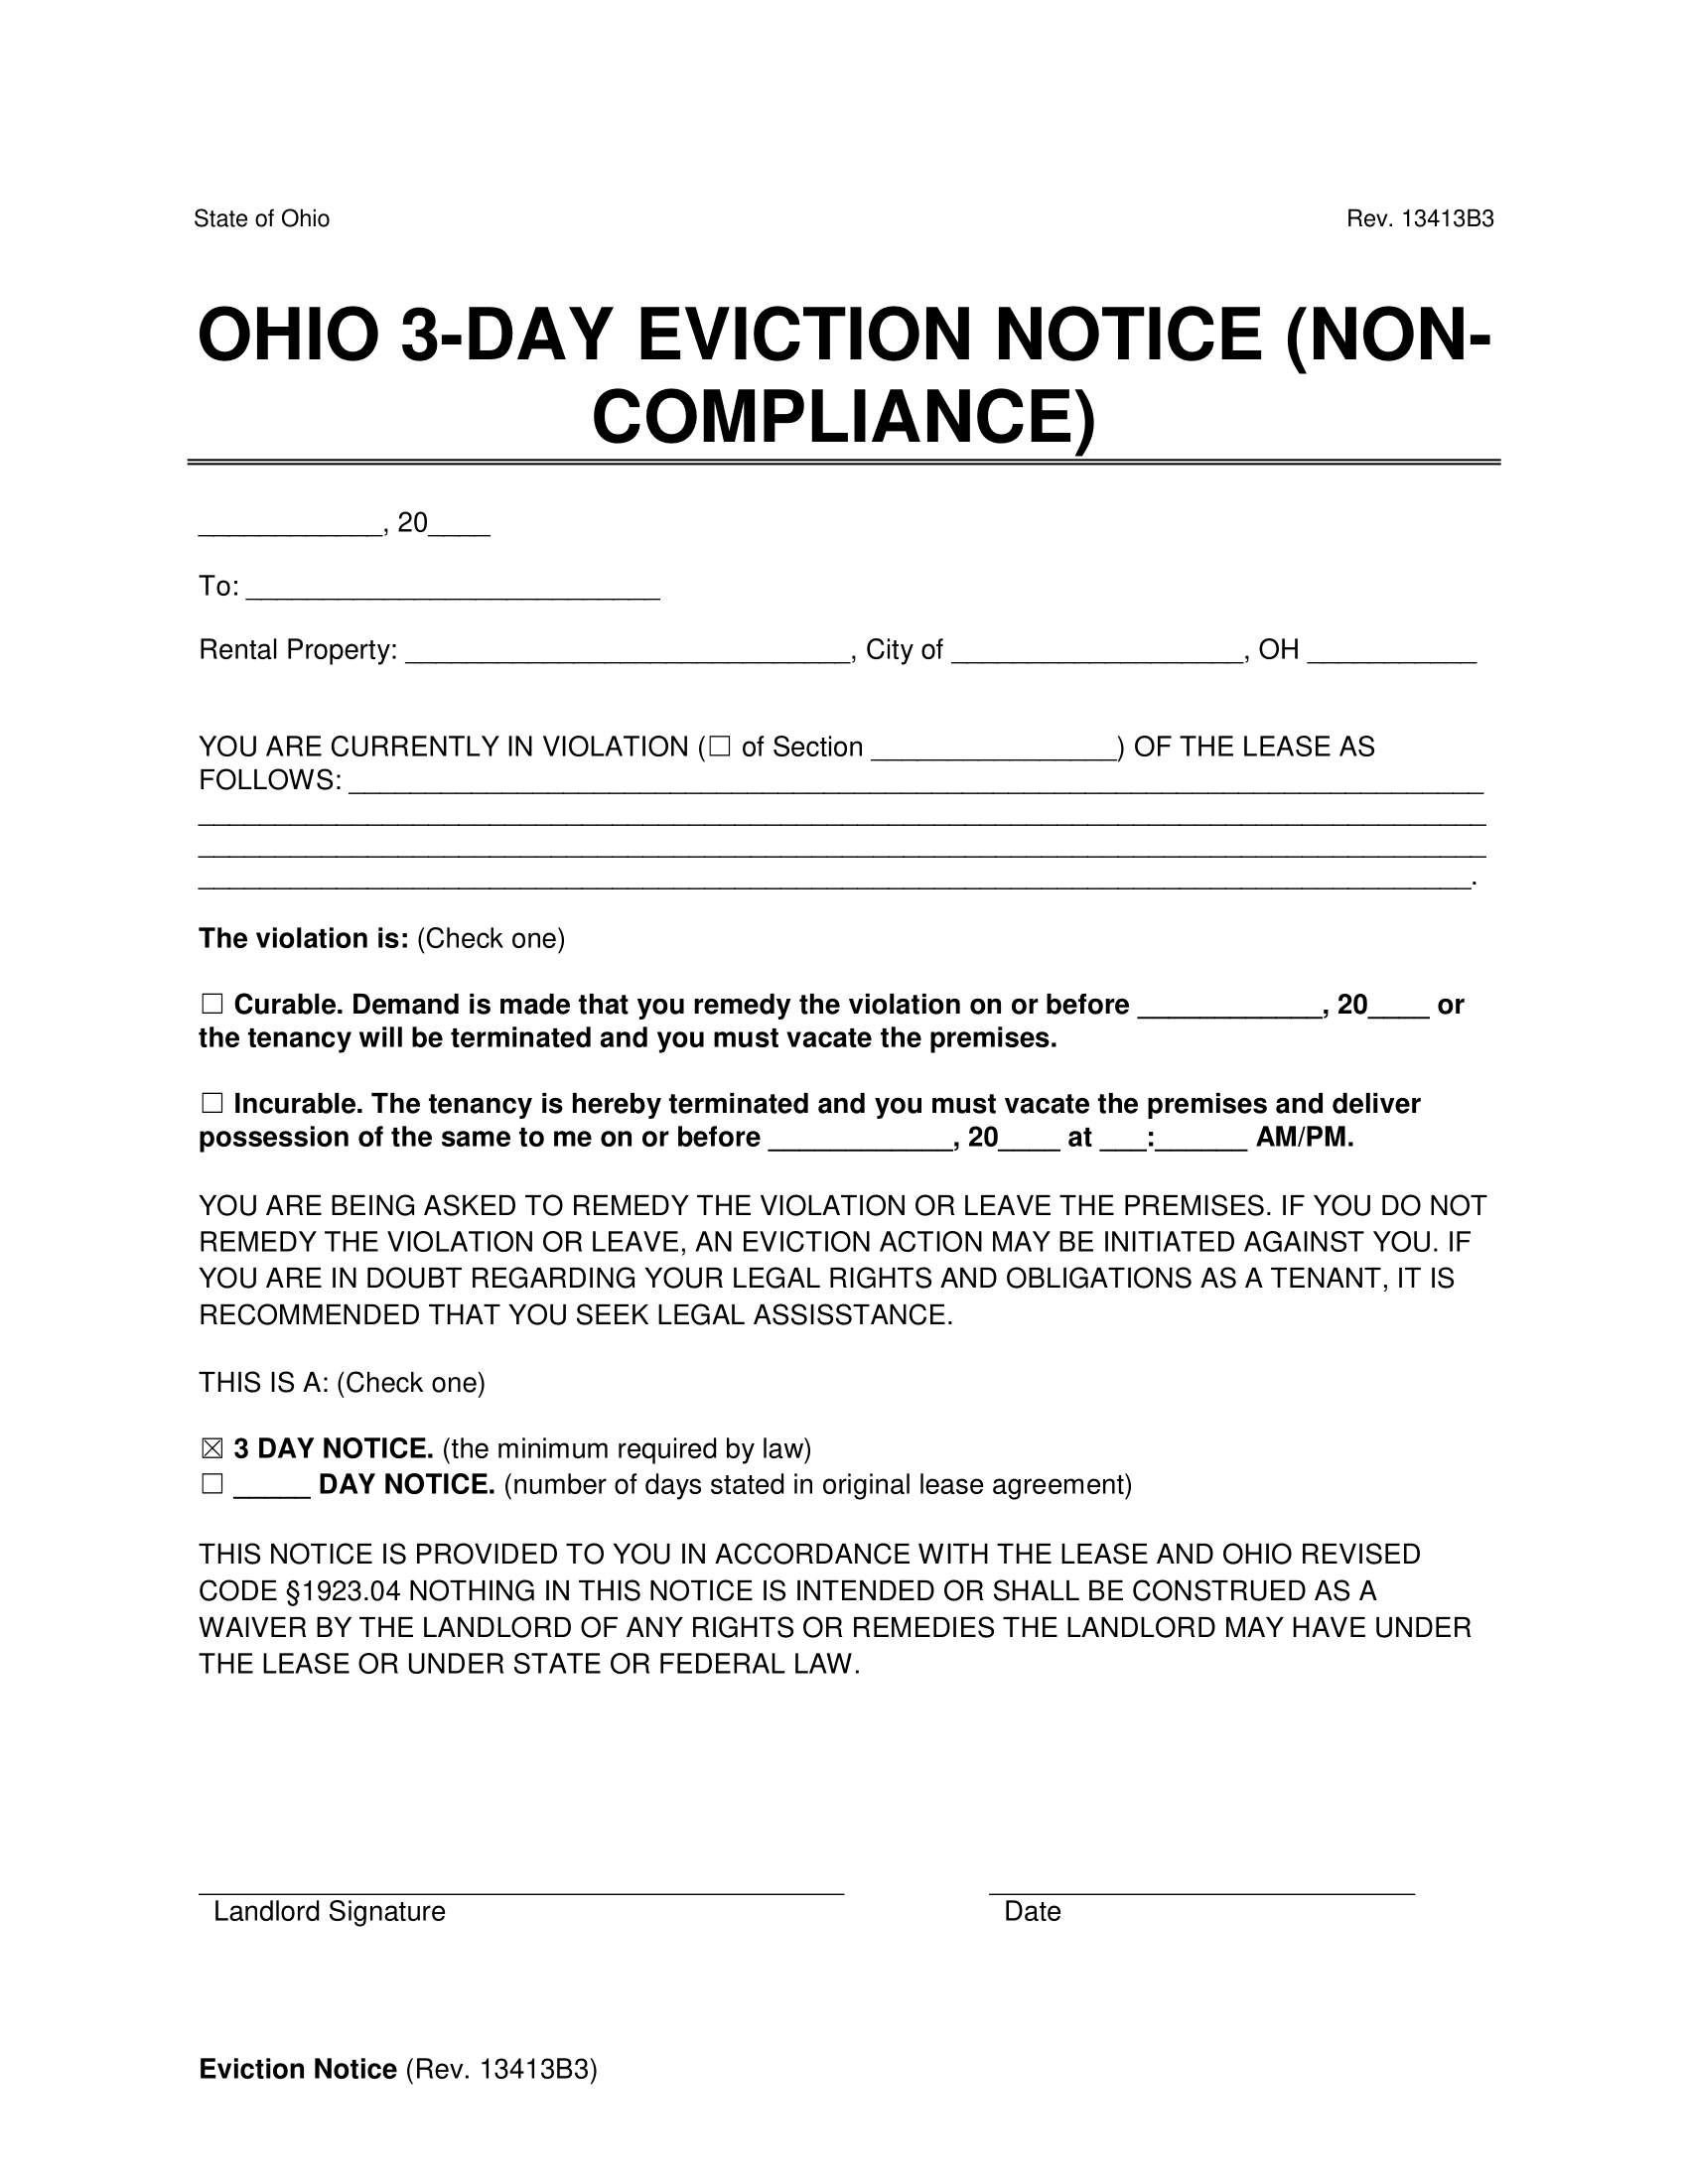 Ohio 3-day Eviction Notice for Non-compliance